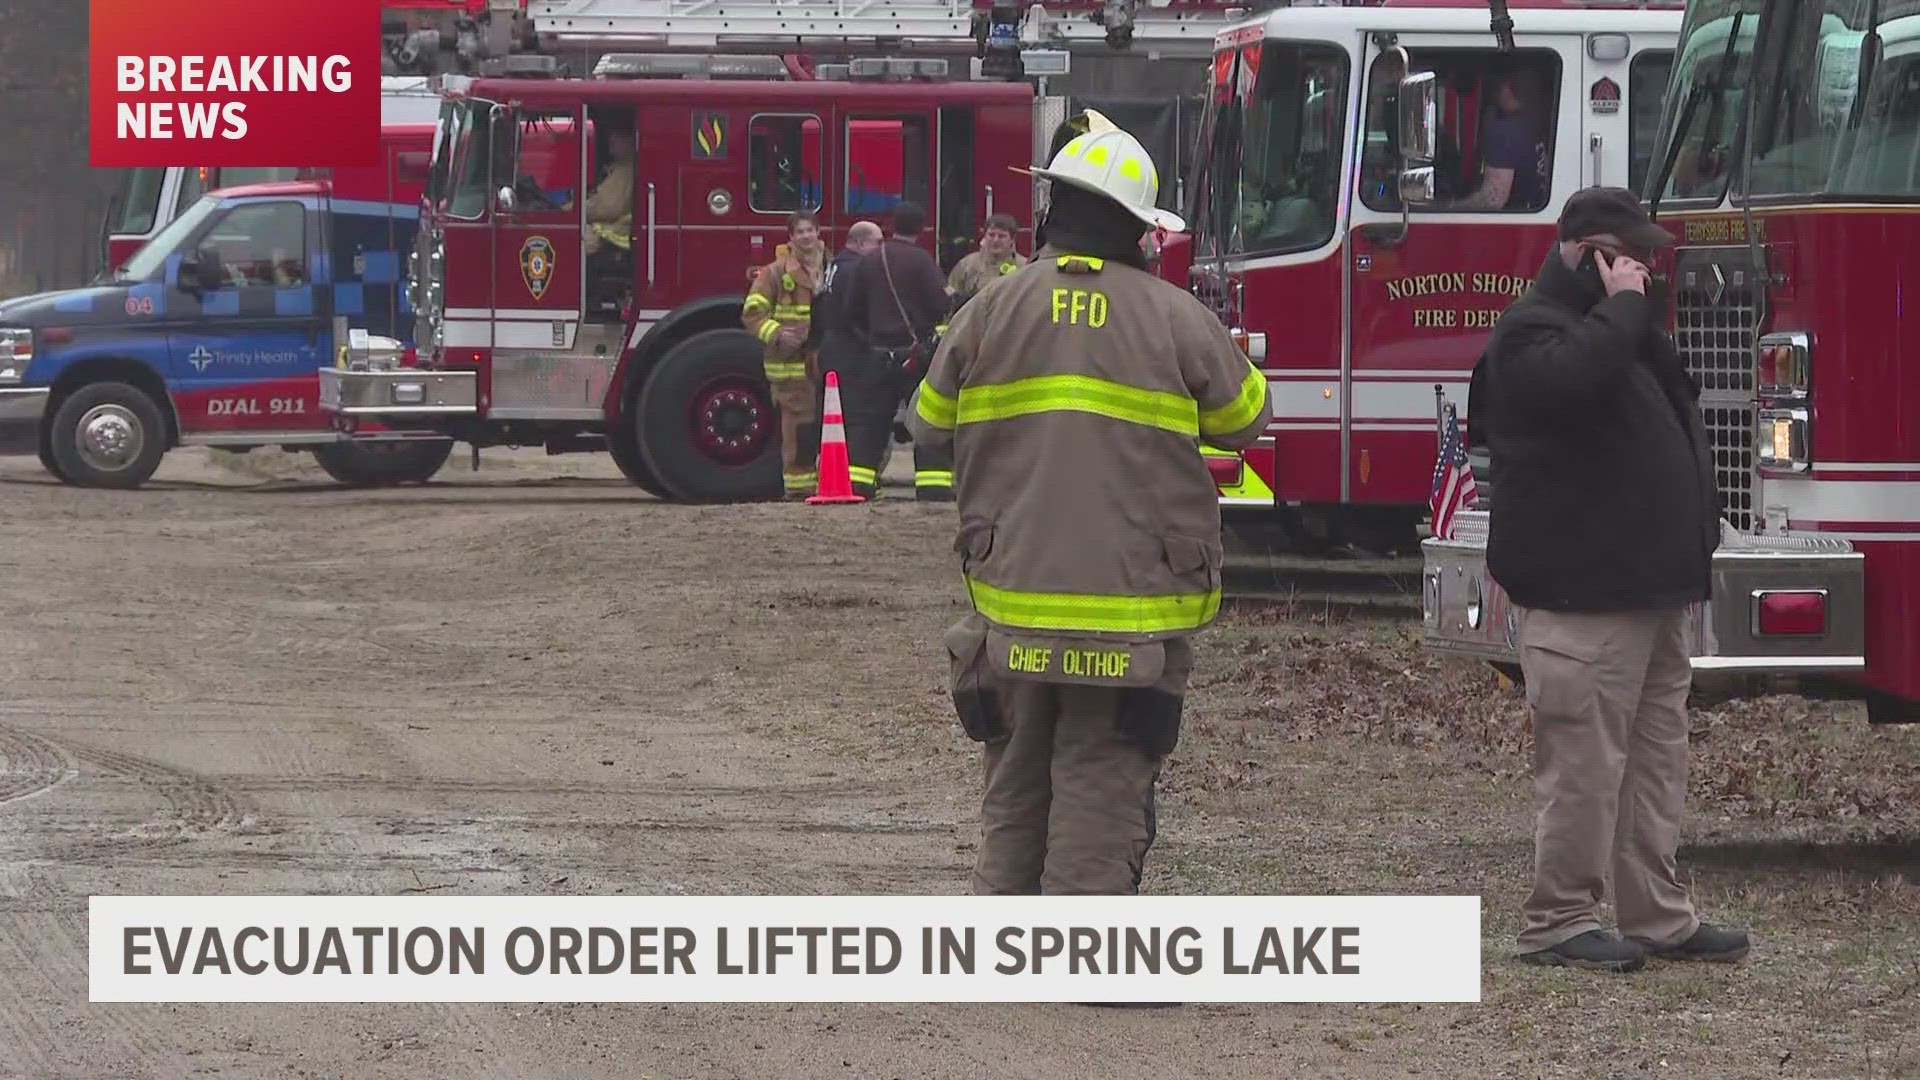 Around 6:15 p.m. Saturday, the evacuation alert telling residents within a half-mile radius of a fire to evacuate to Spring Lake Presbyterian was lifted.